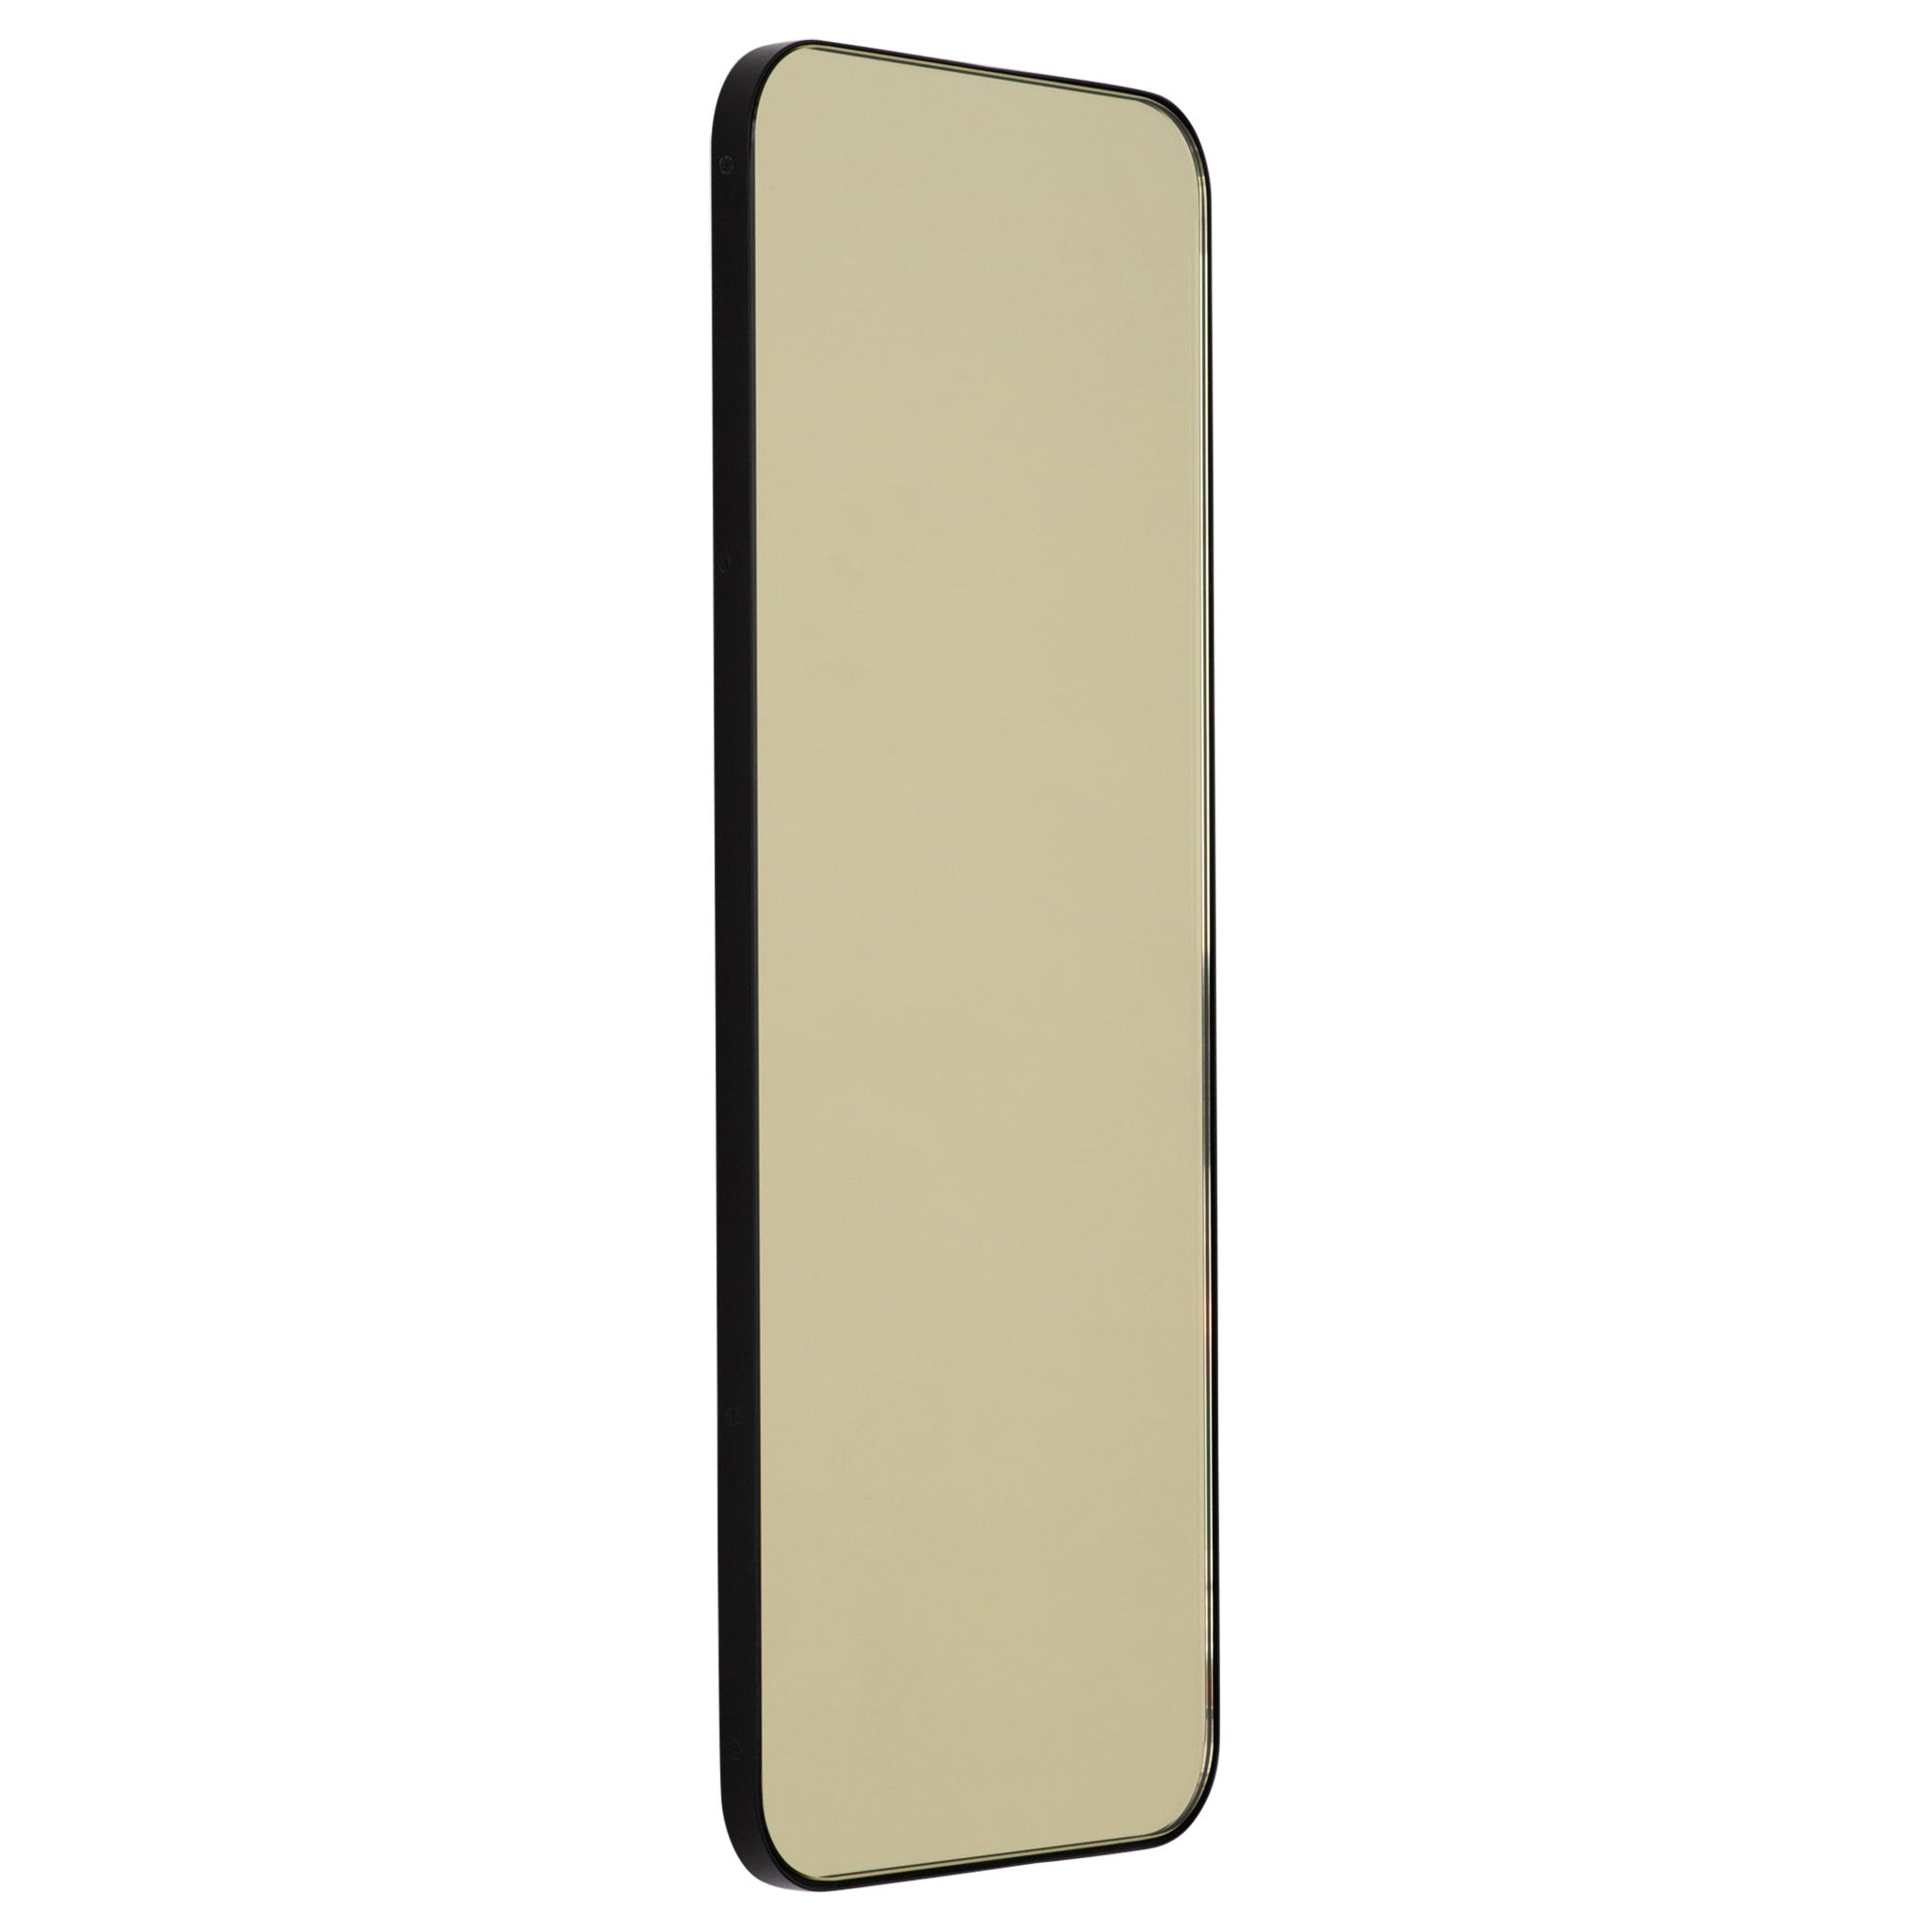 Quadris Gold Tinted Rectangular Modern Mirror with a Black Frame, XL For Sale